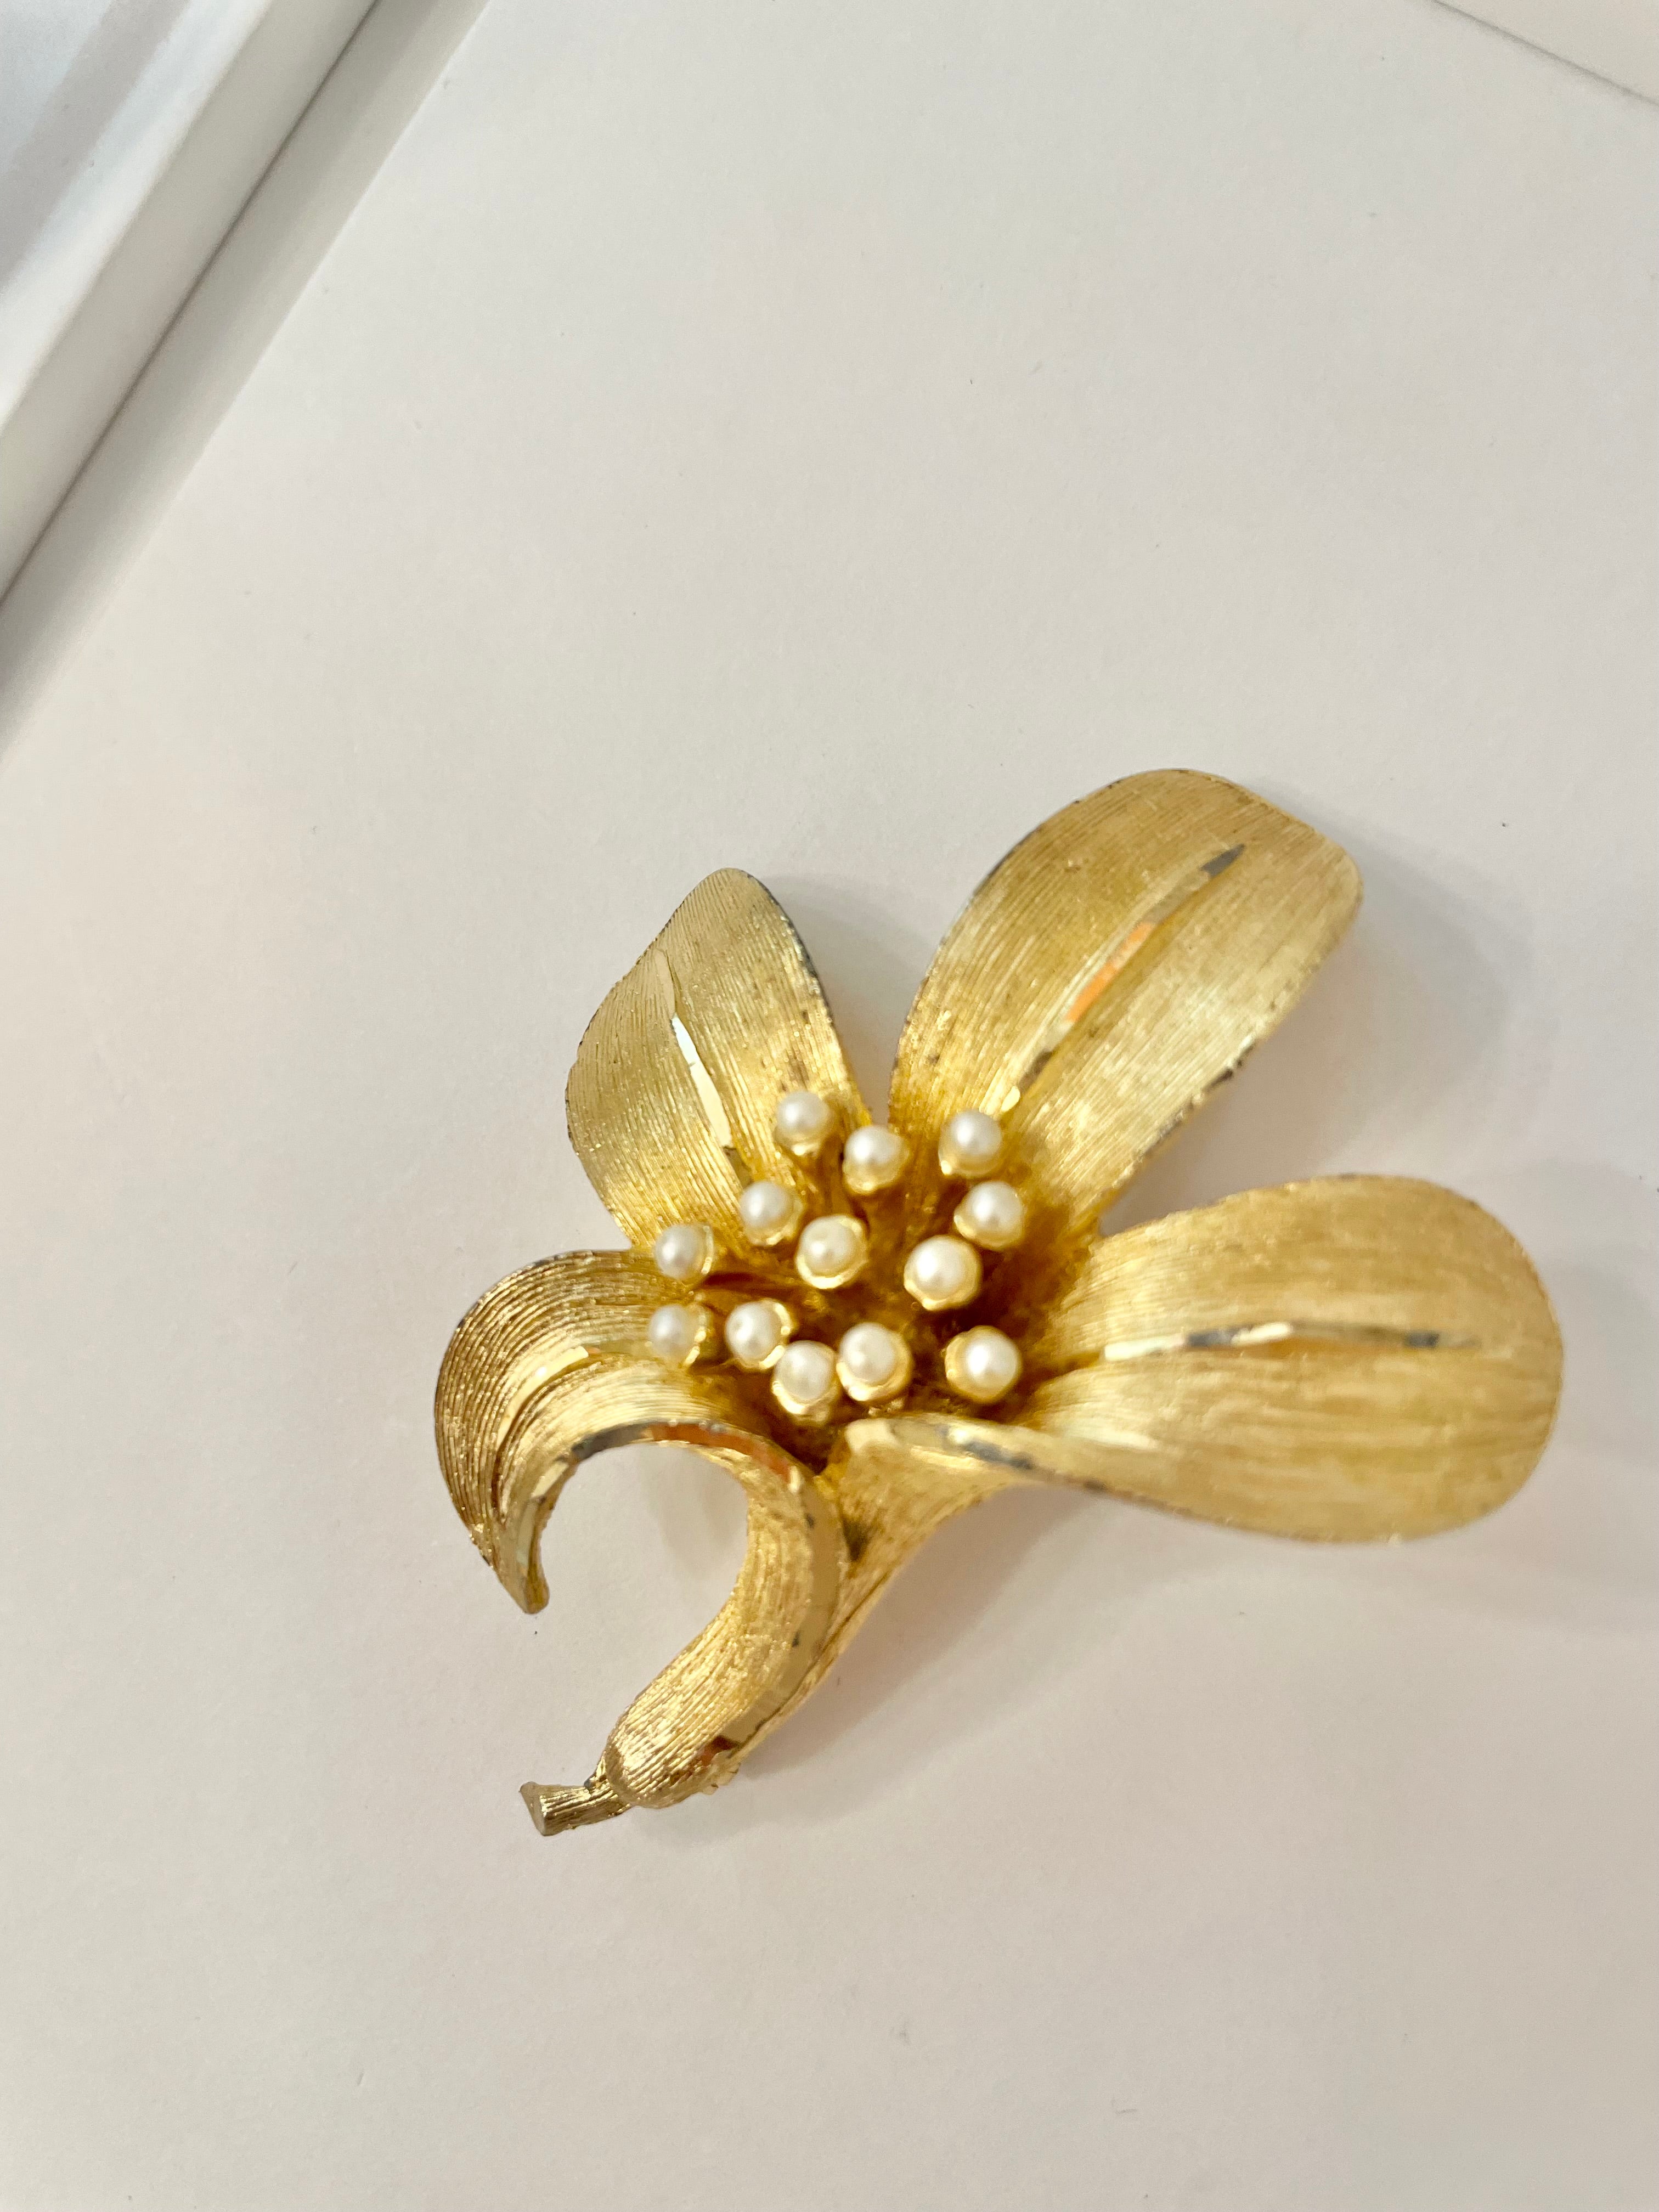 Isn't she charming... adores anything with pearls! This divine gold sculpted lily brooch is outstanding.